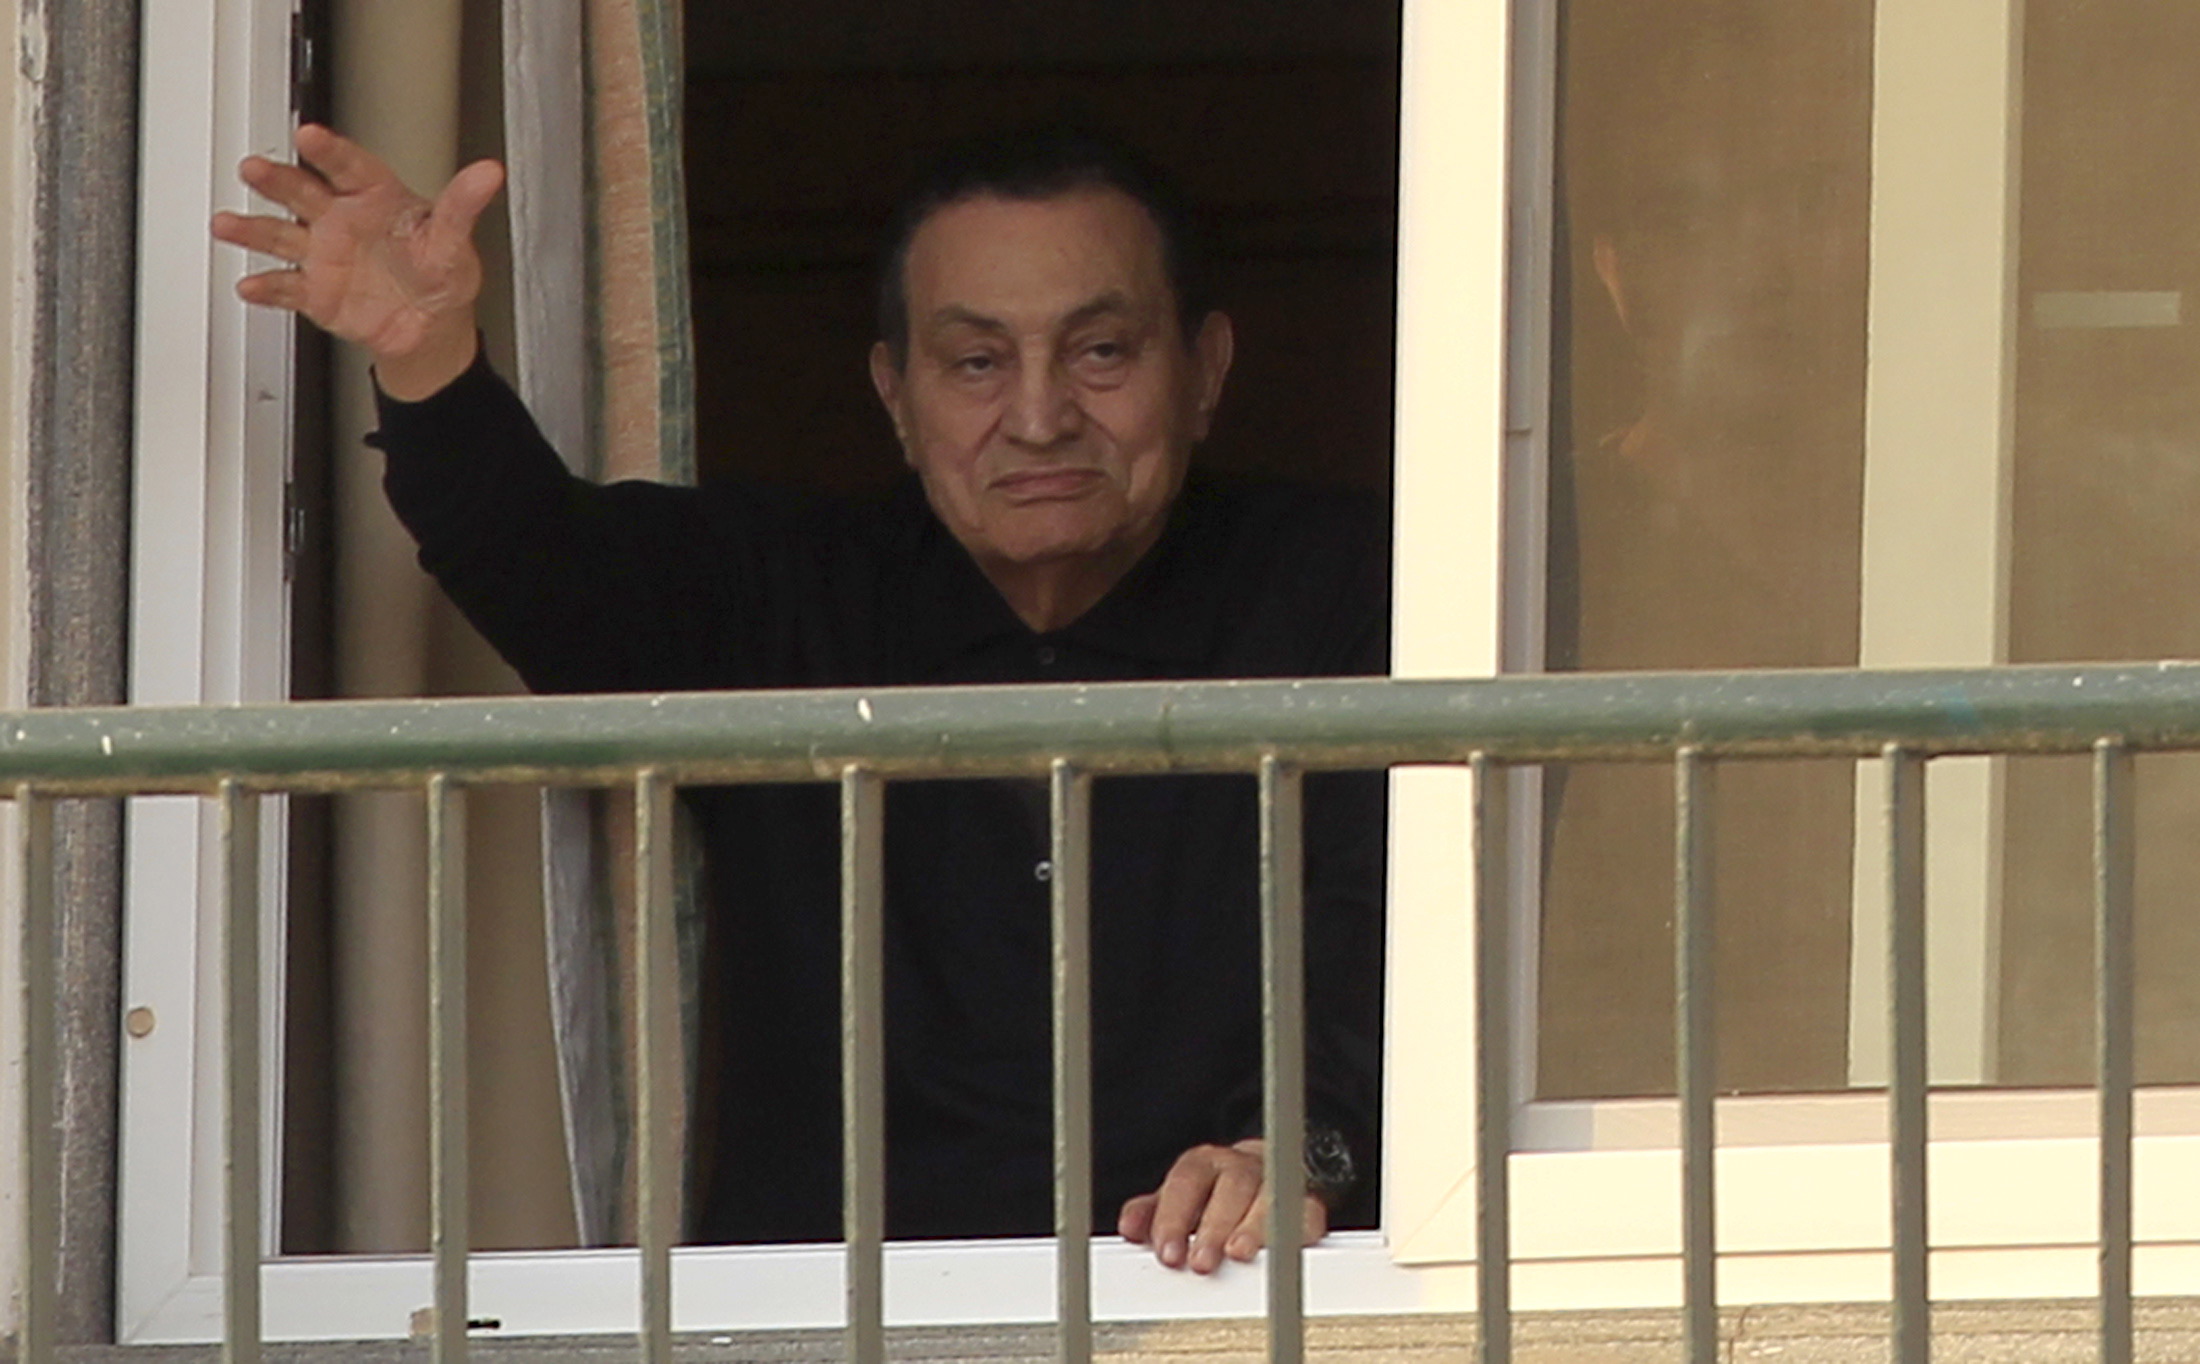 Court sentences Mubarak and sons to three years of maximum security prison